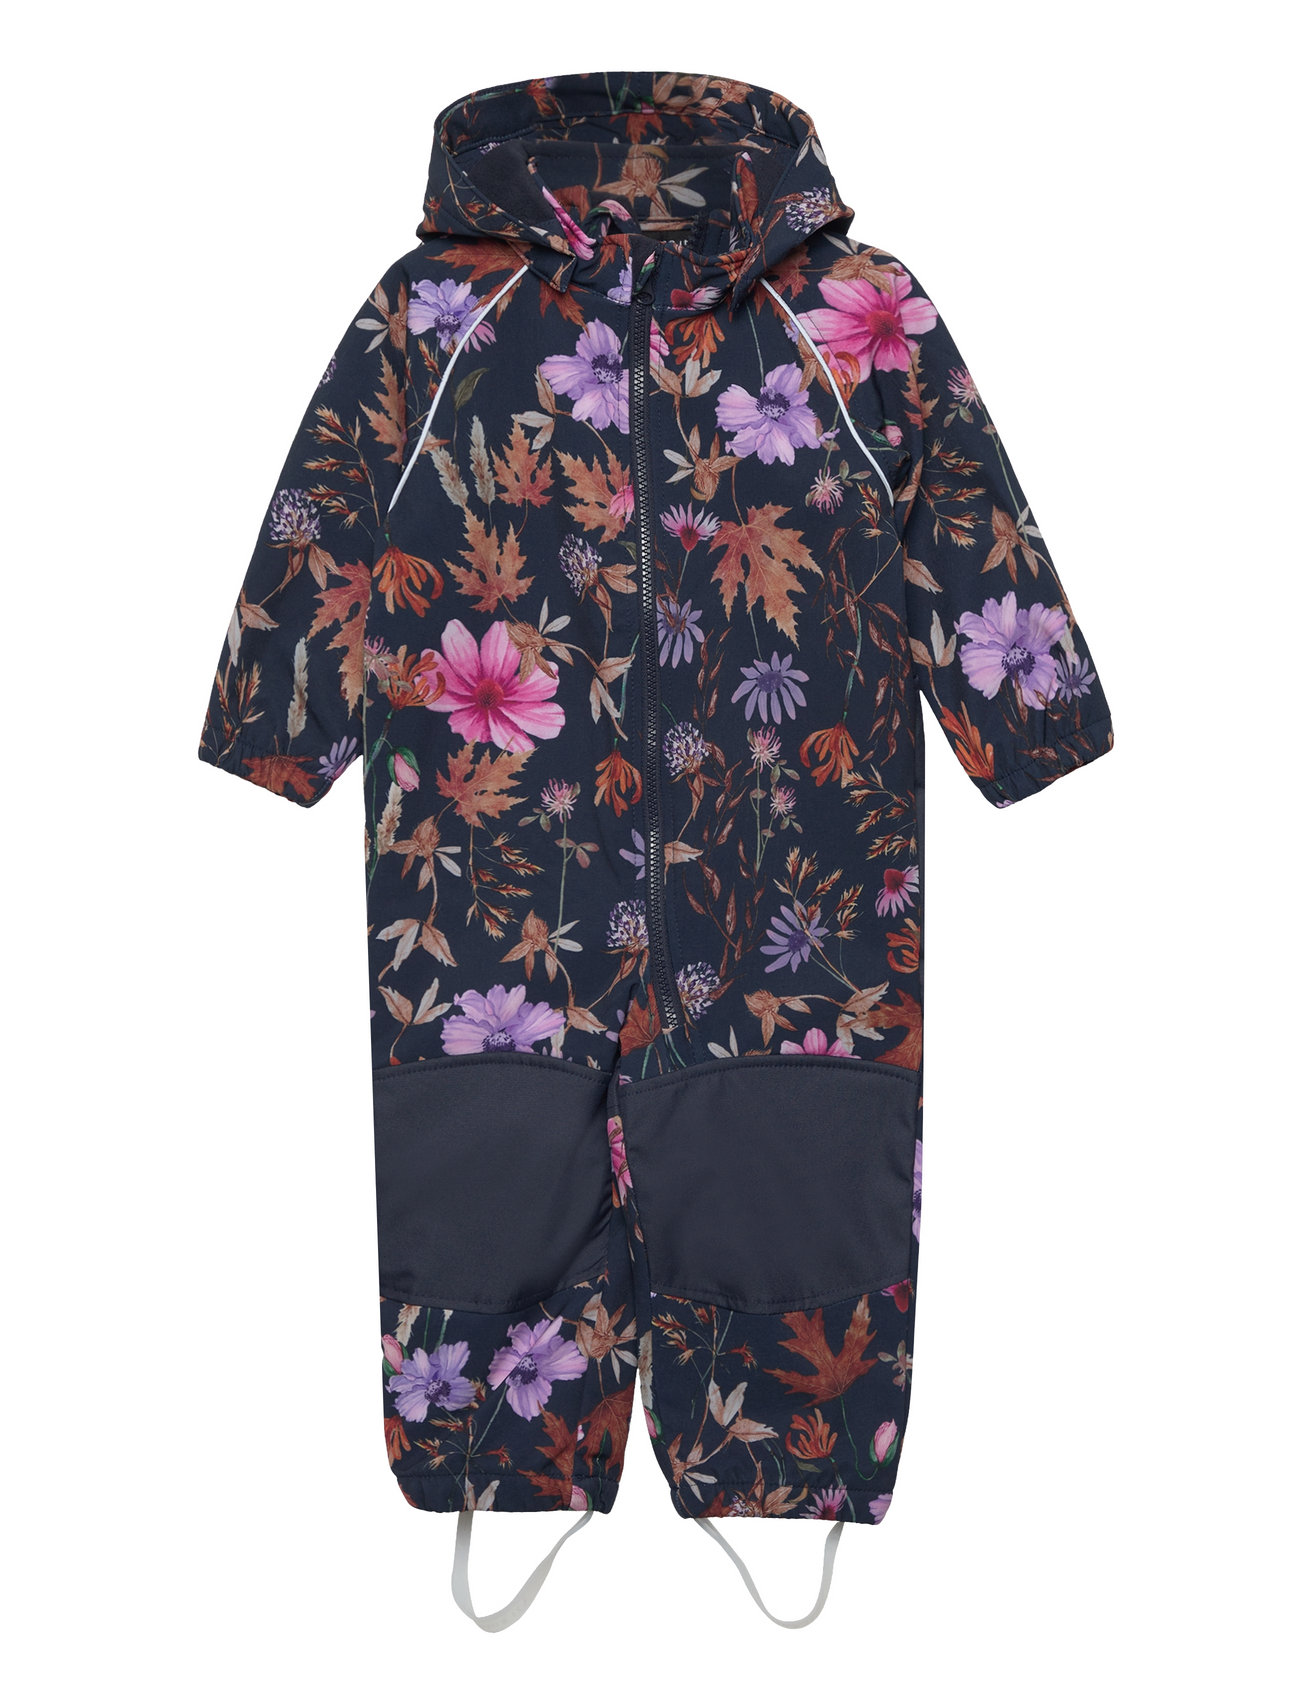 delivery 31.35 it Suit Boozt.com. Buy Autumn - Coveralls Flower at from €. it Nmfalfa08 and returns easy name Noos Fast online name Fo